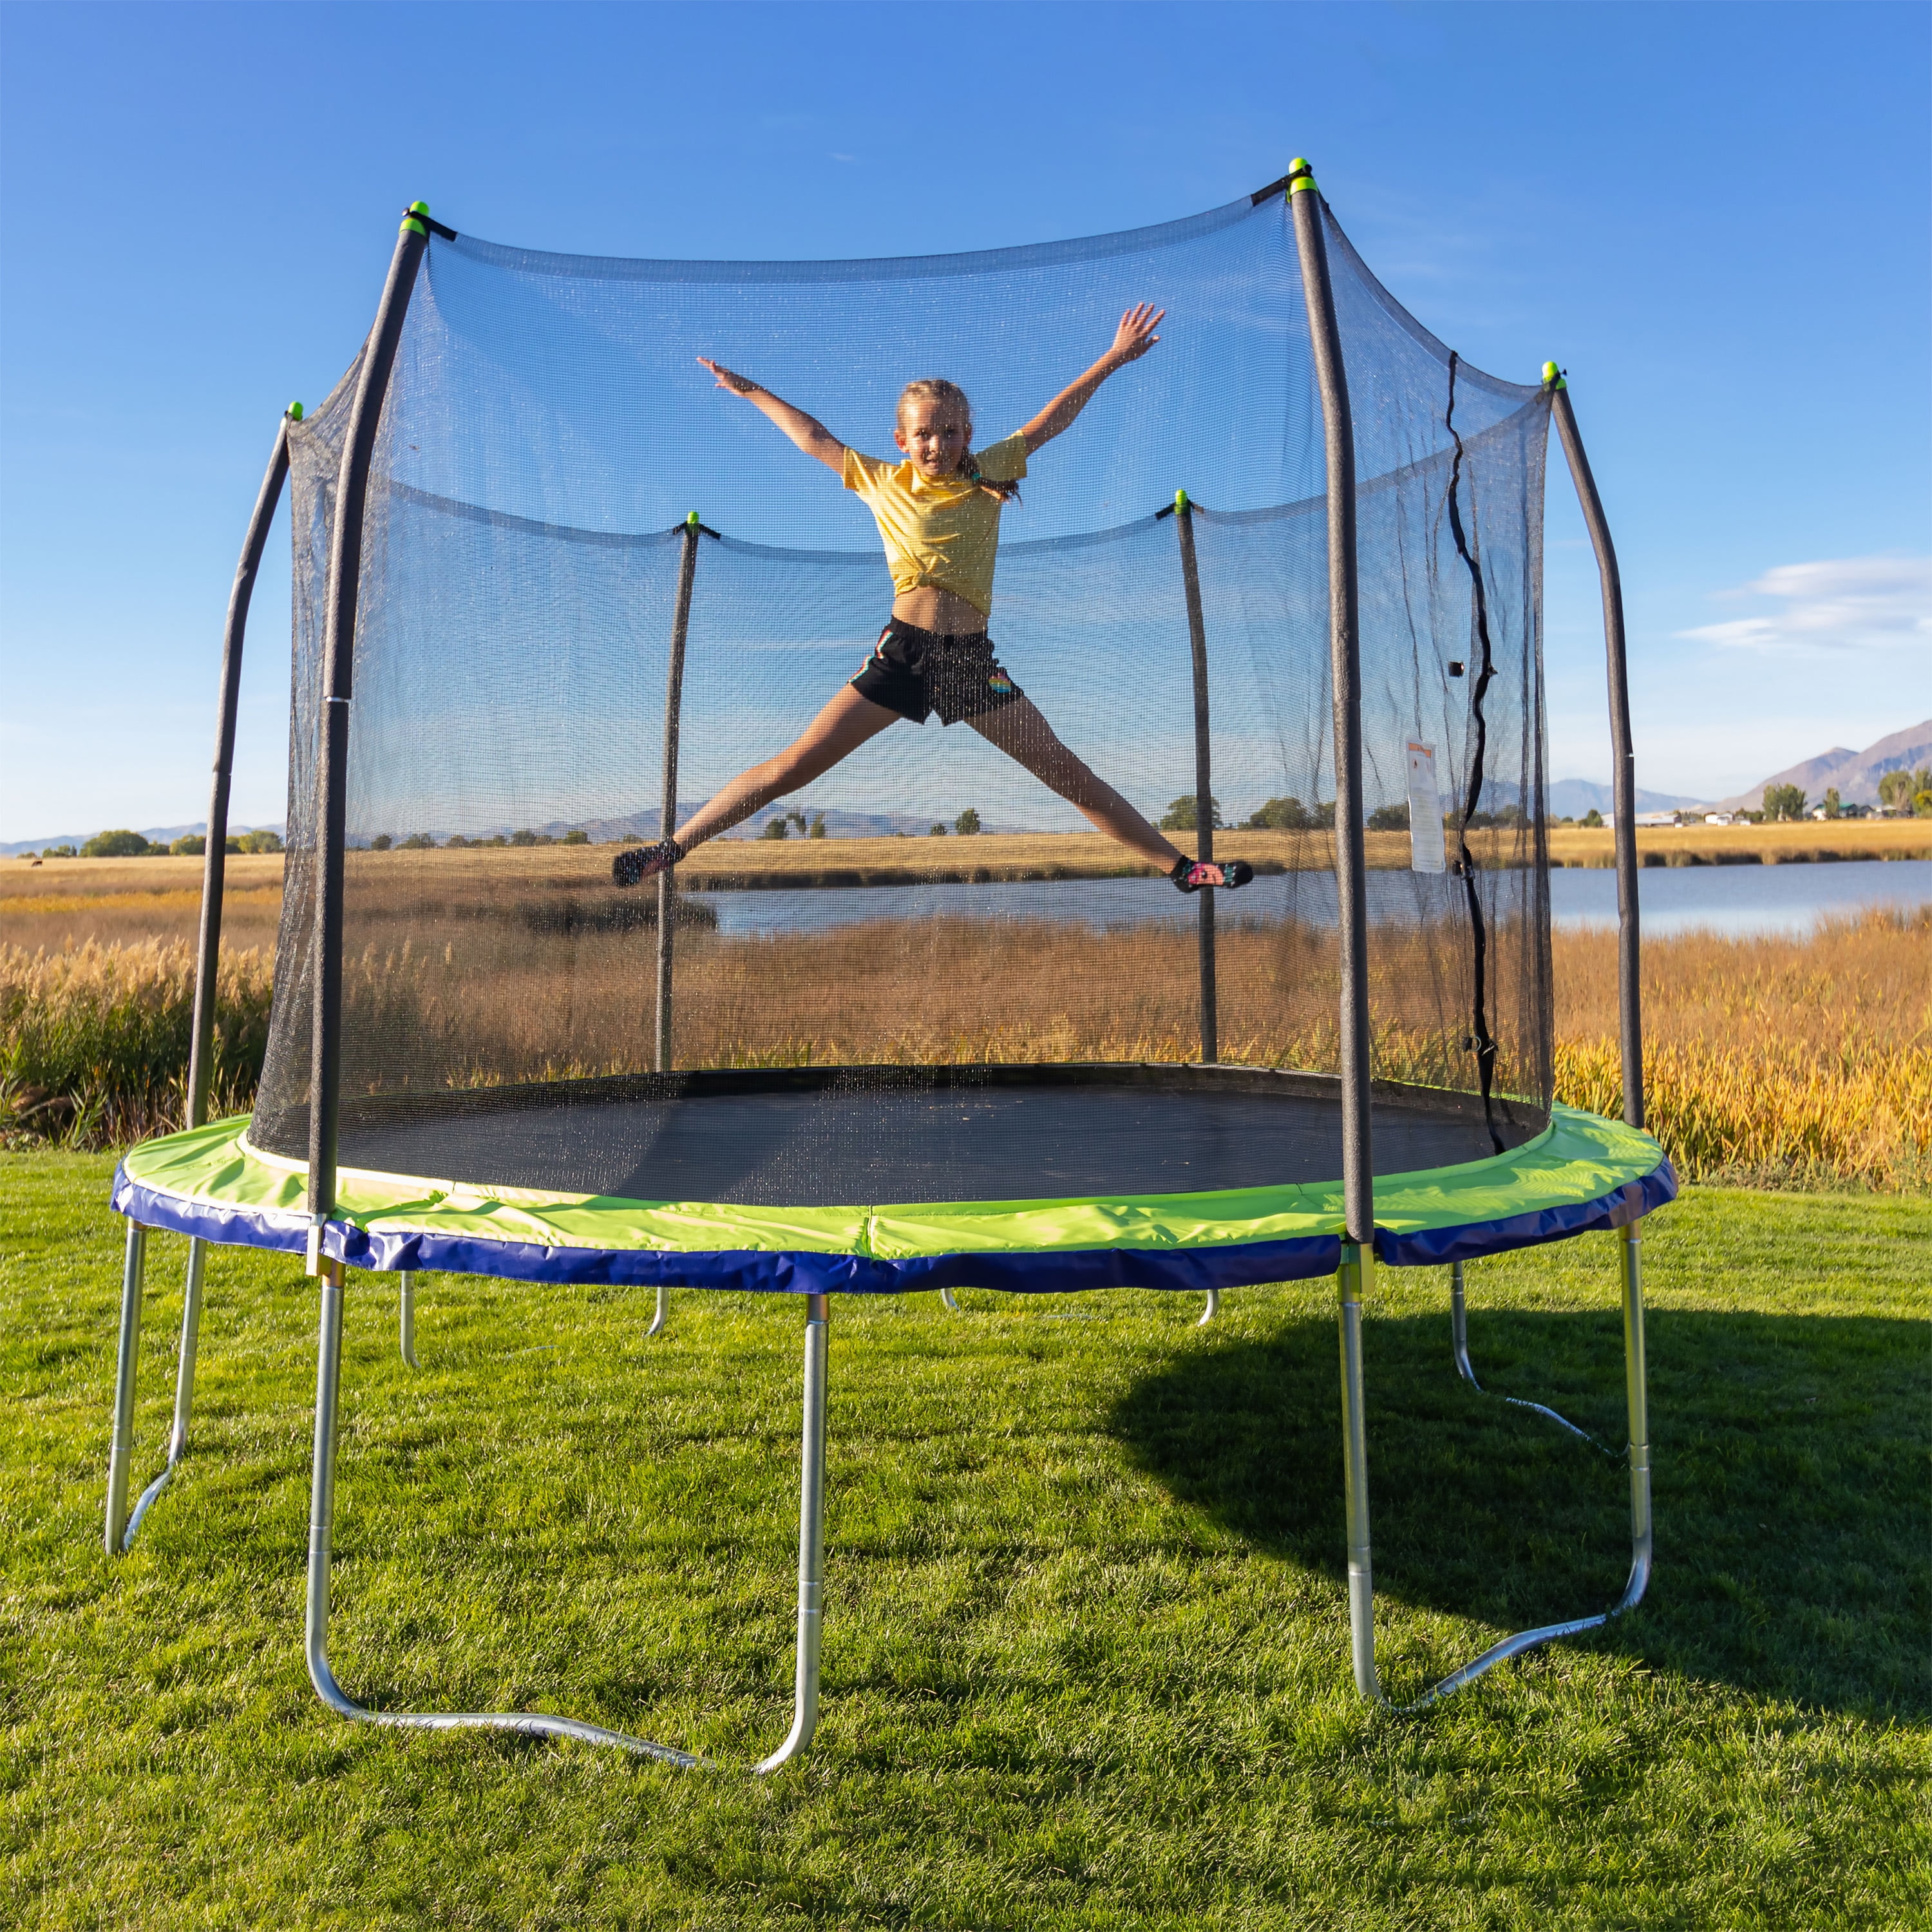 Round Dual Lime/Blue Lighted Spring Pad Skywalker Trampolines Pre-Packaged 12 Ft 